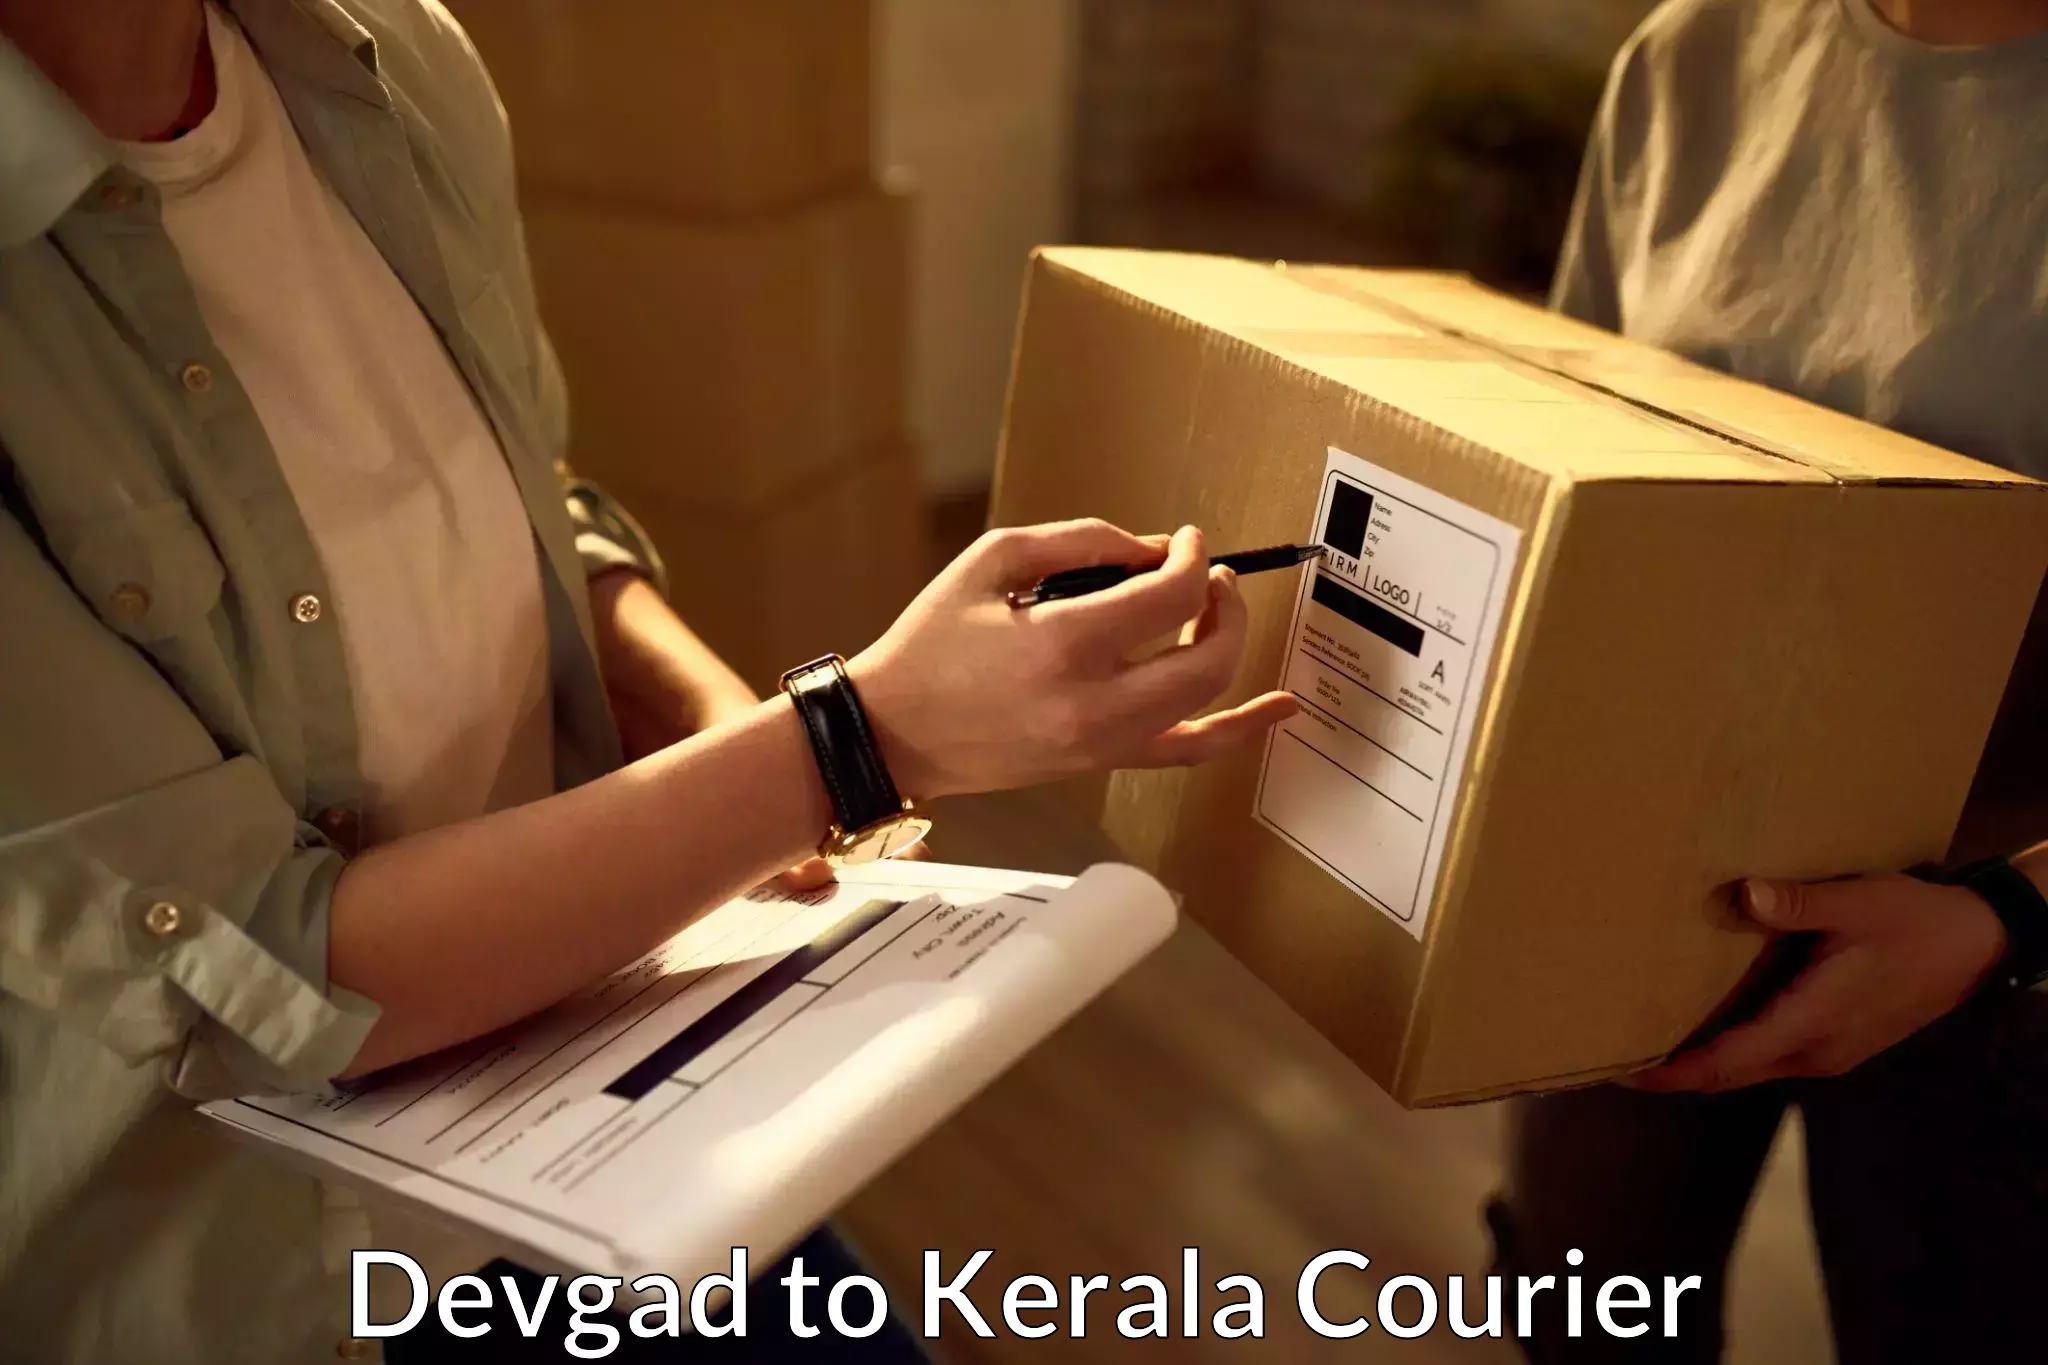 Multi-national courier services Devgad to Cochin University of Science and Technology